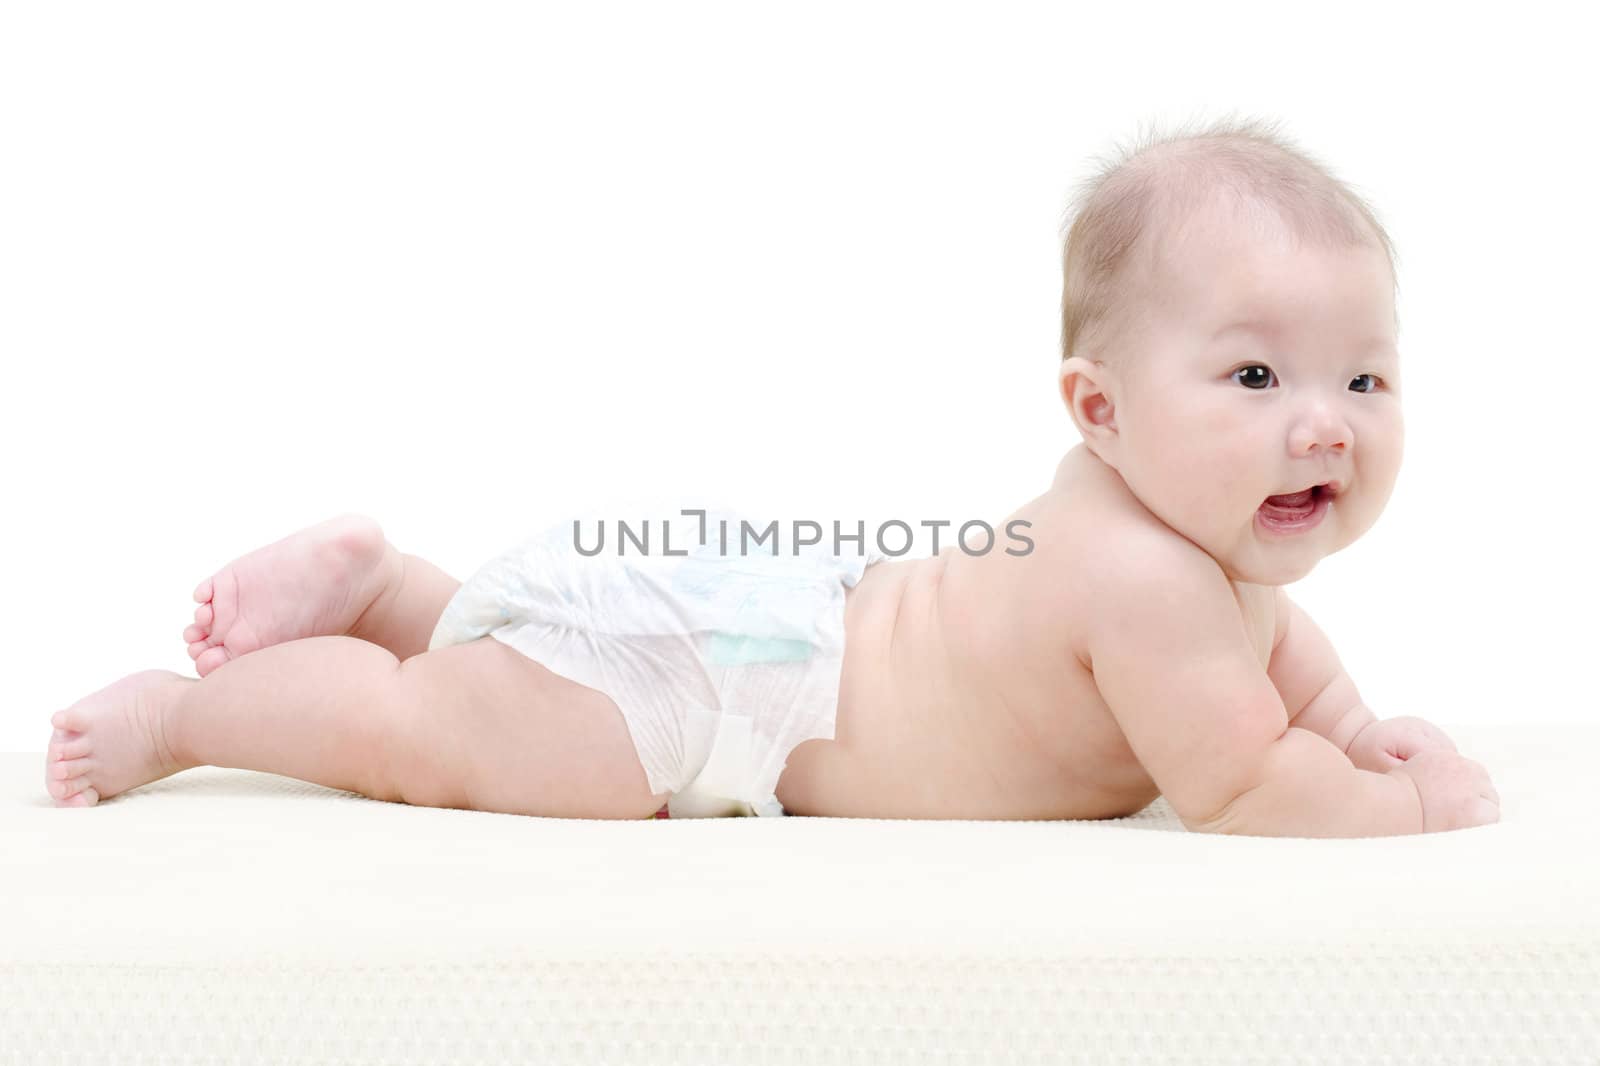 Five months old baby girl happy crawling on bed